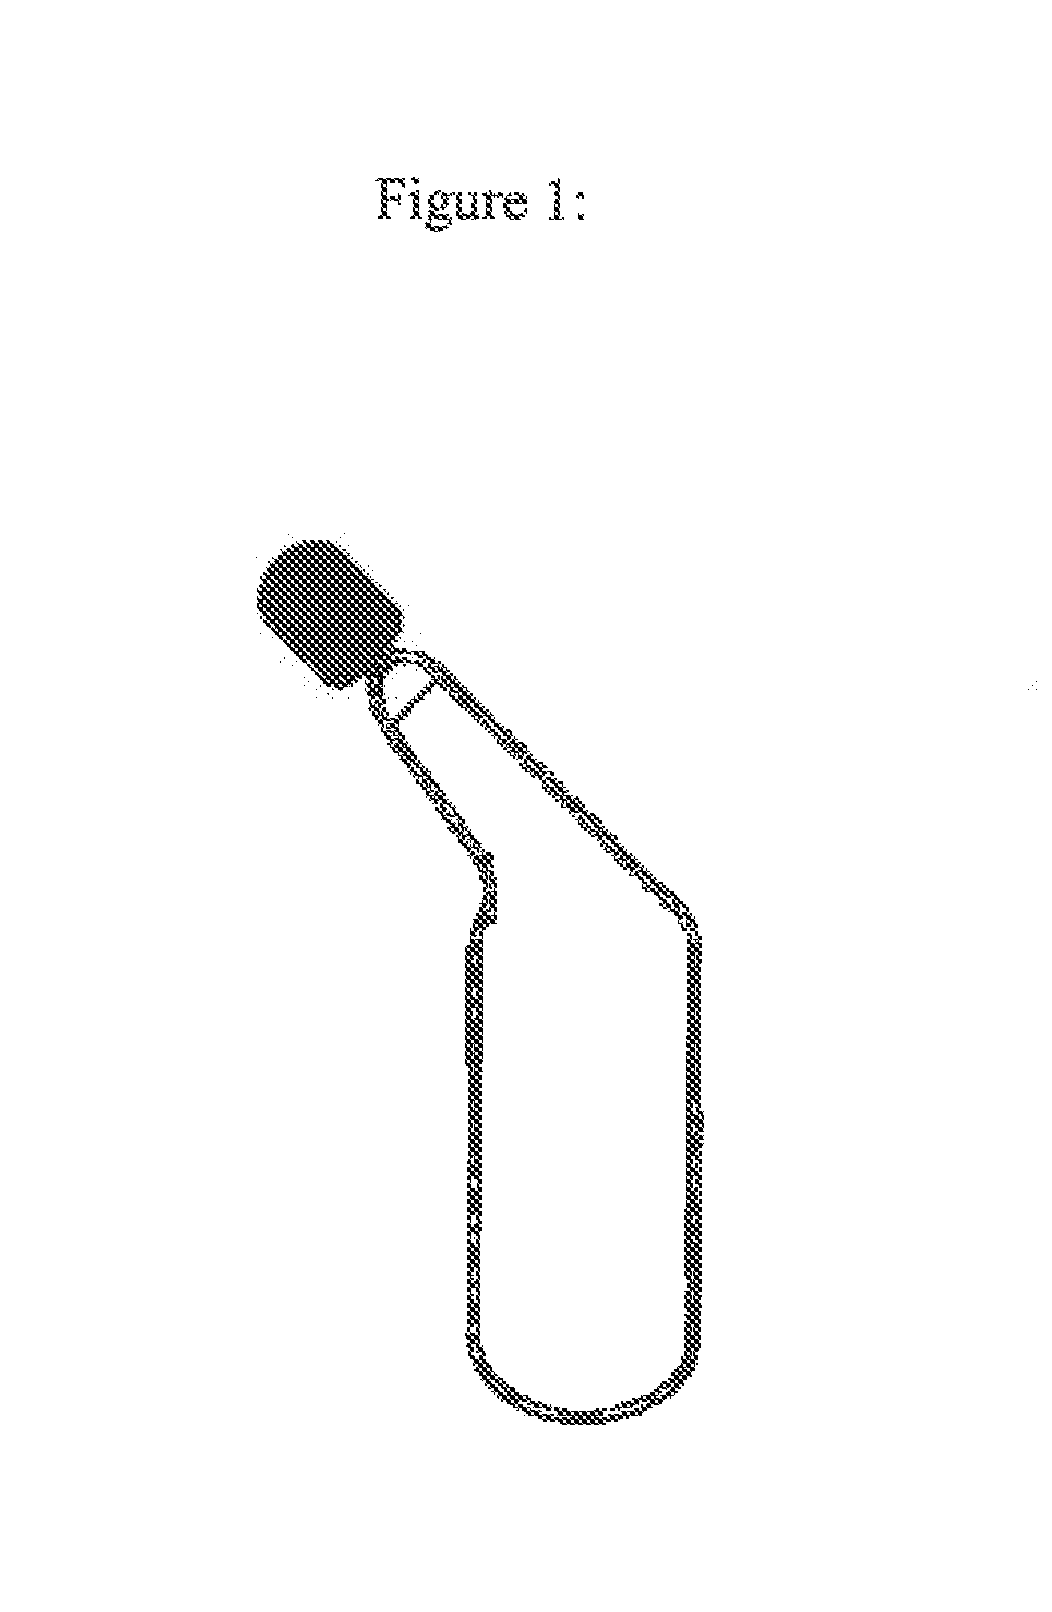 Product and method for adding caffeine to beverages